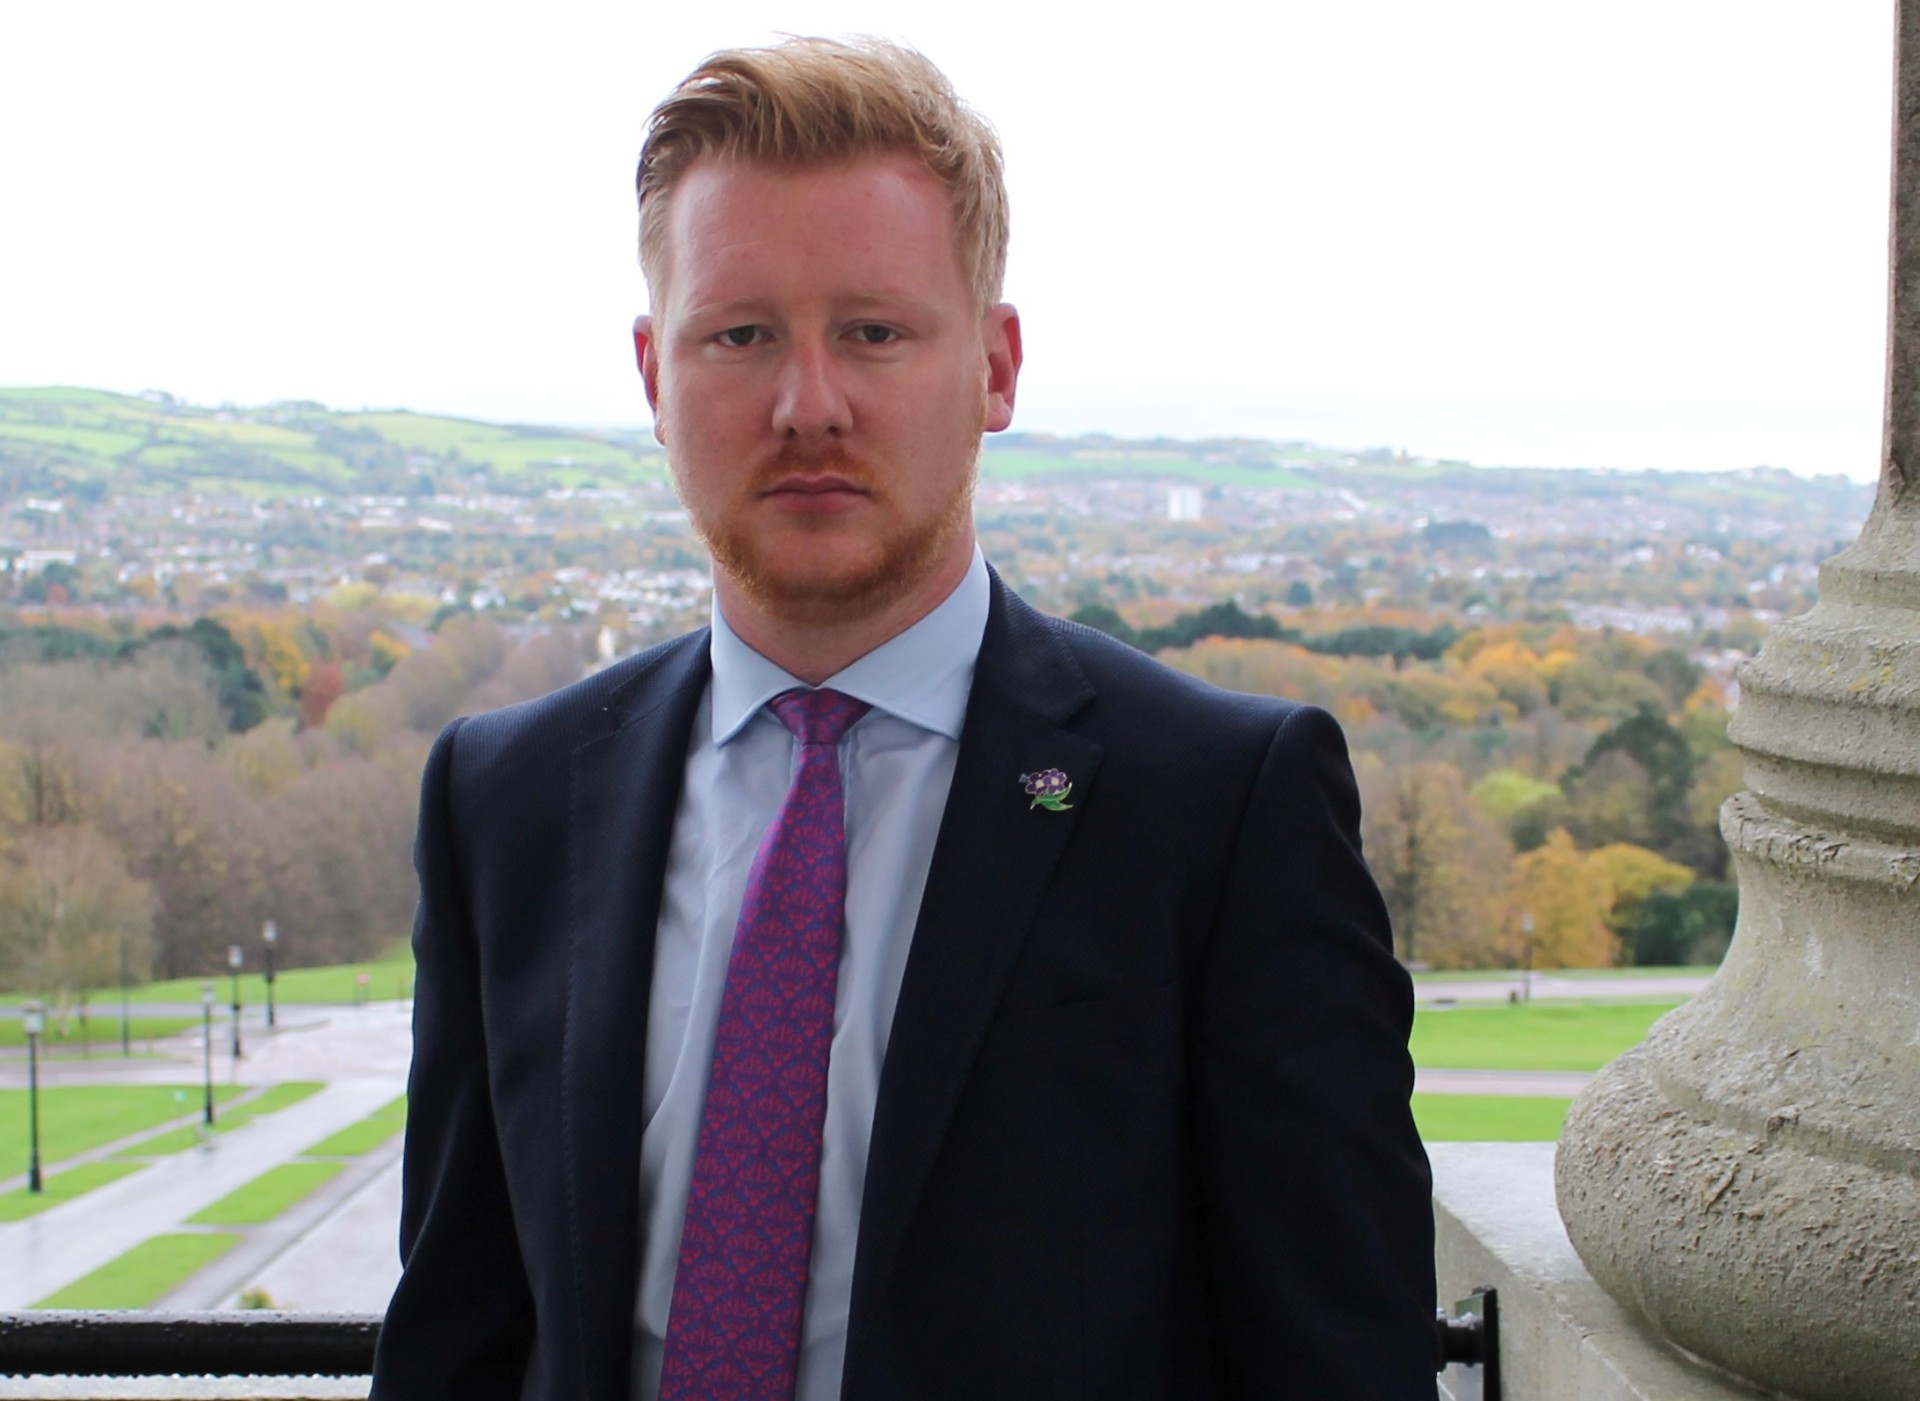 Early election would be a ‘mistake’, says McCrossan